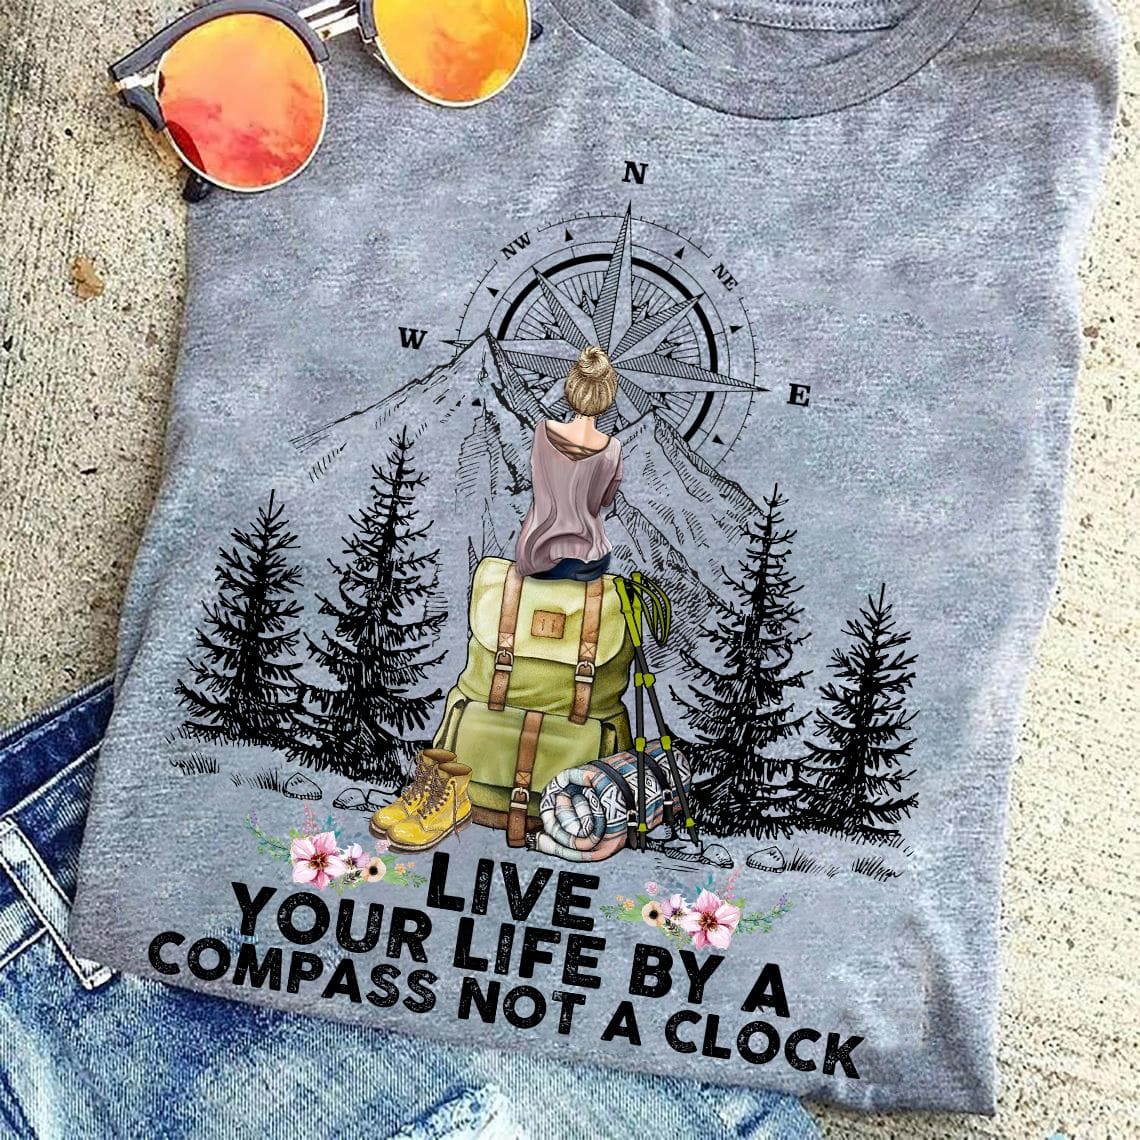 Live your life by a compass not a clock - Hiking equipment, girl loves hiking